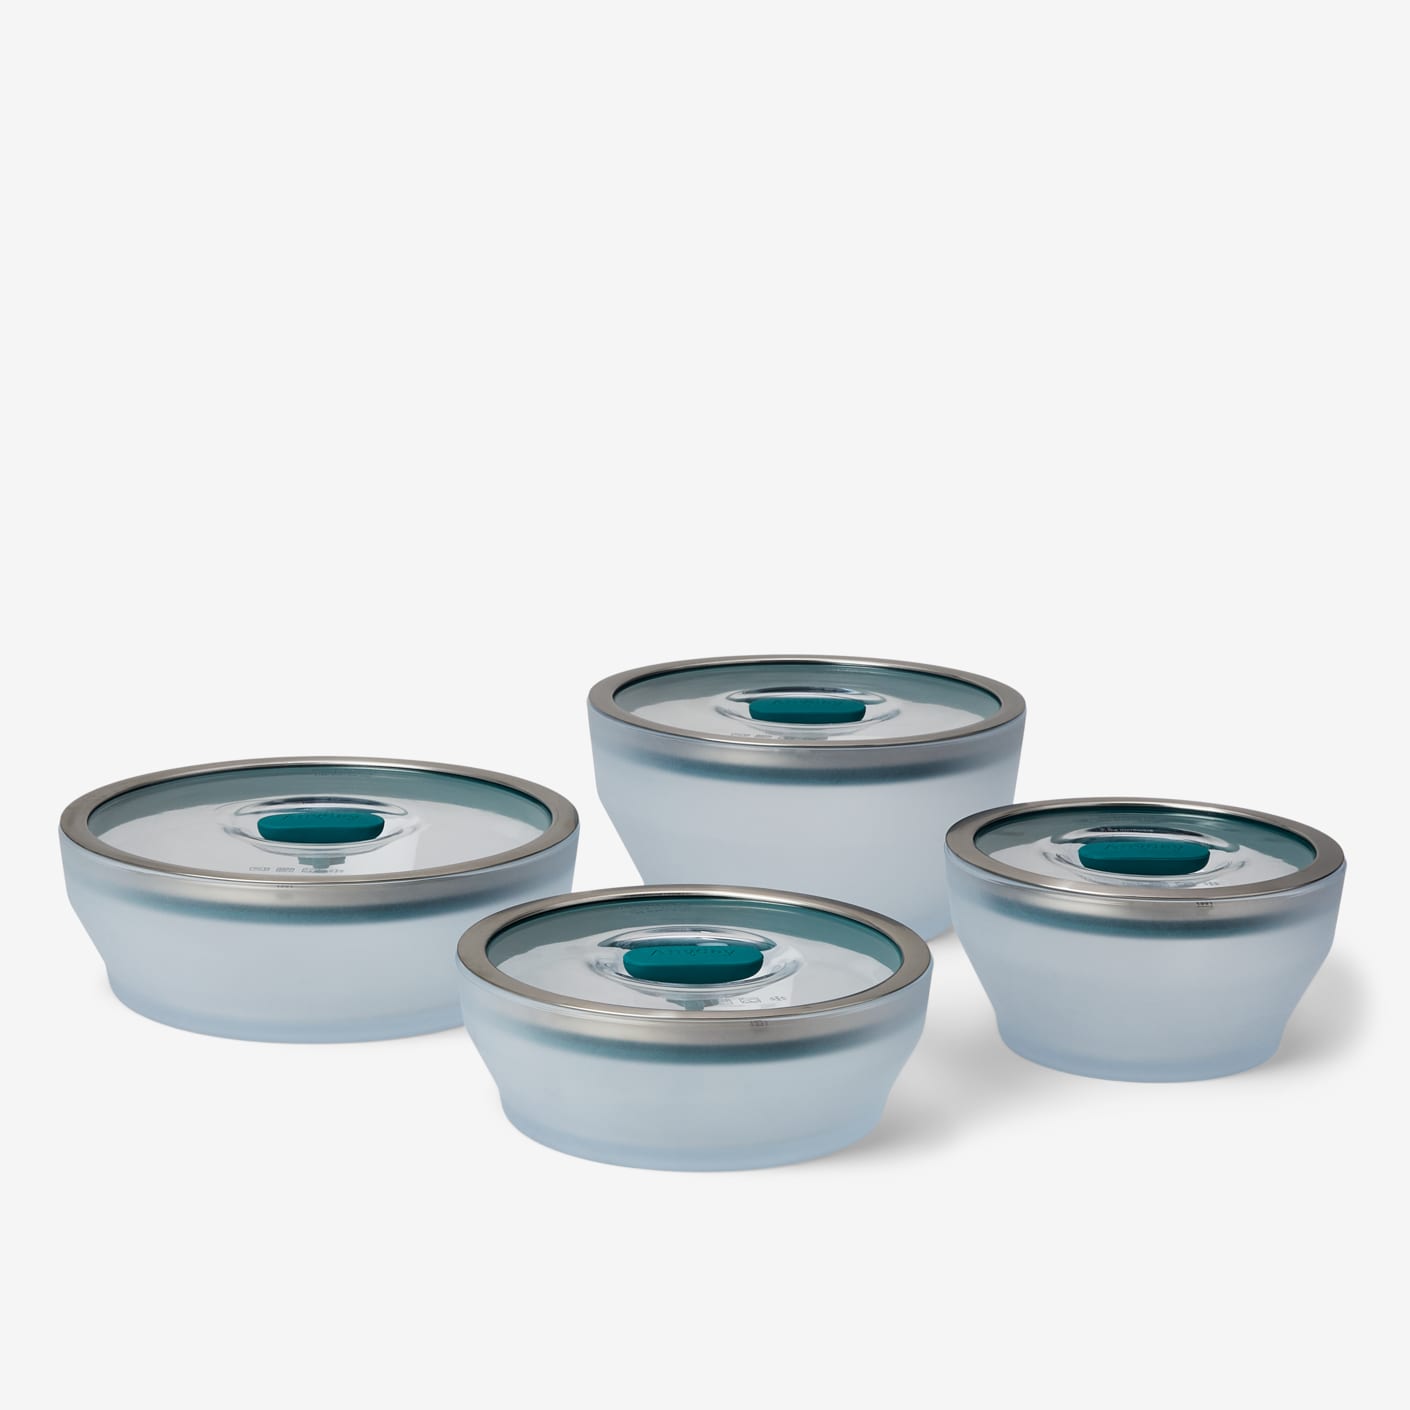 Anyday Microwave Cookware Everyday Set - Kale